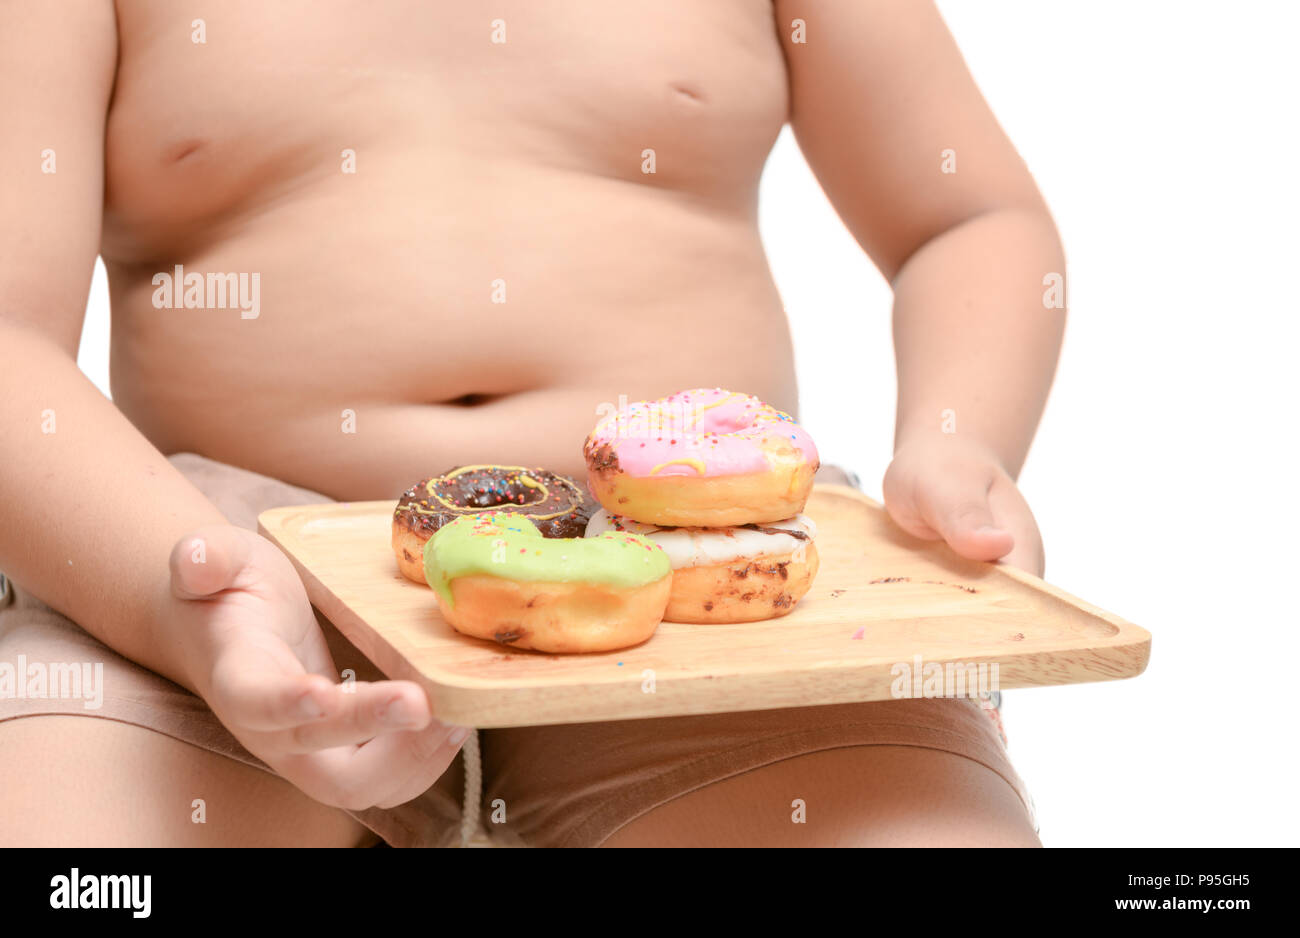 Obese fat boy is holding donut isolated on white background, junk food and dieting concept Stock Photo